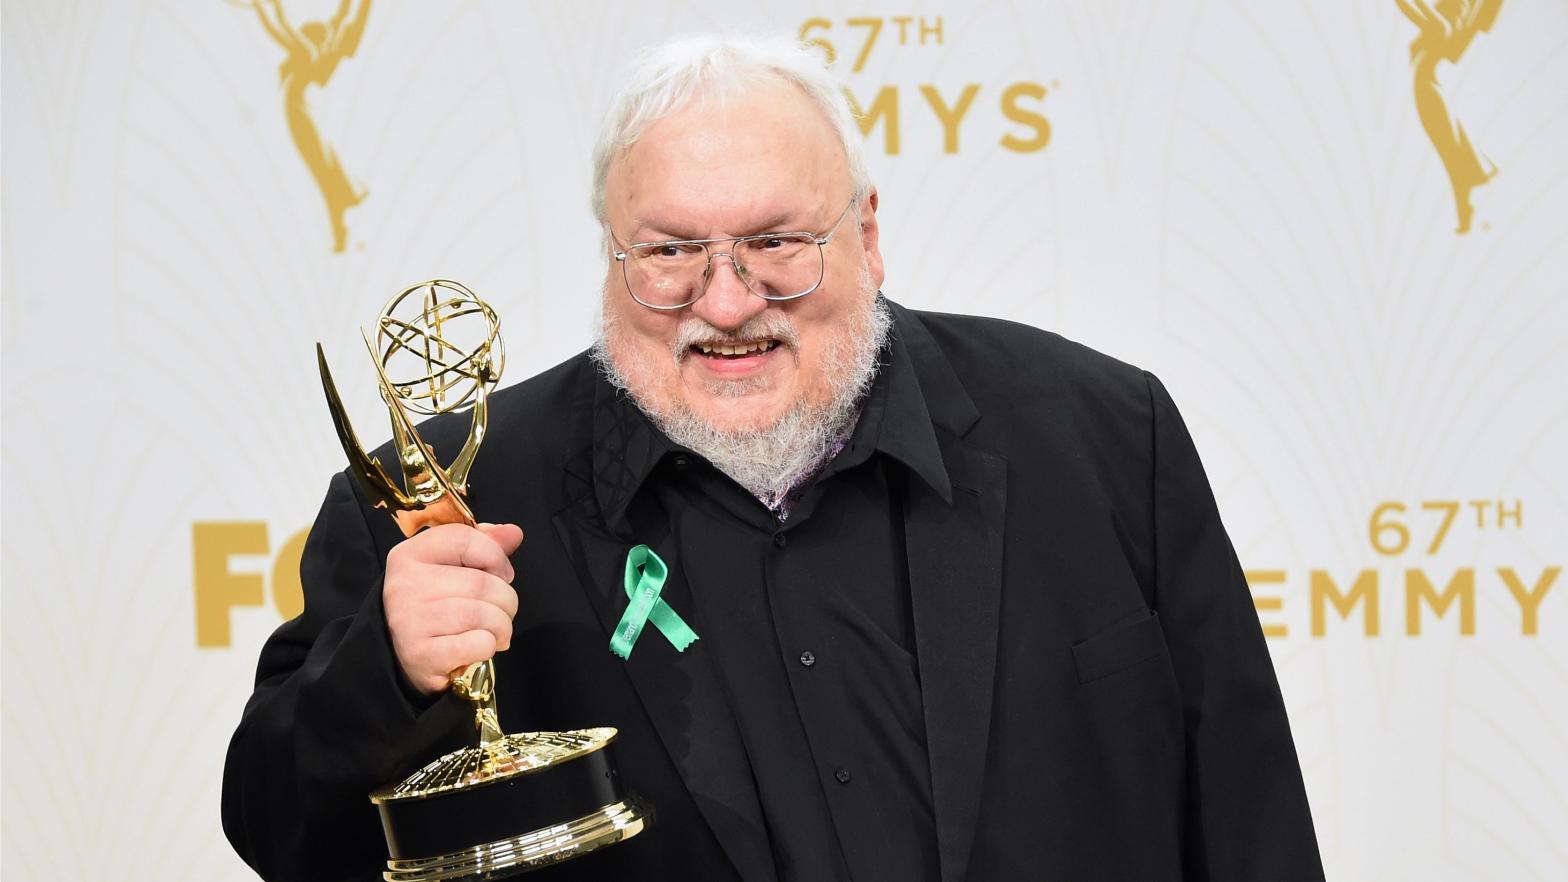 George R.R. Martin at the 2015 Emmy Awards in Los Angeles, California. (Photo: Jason Merritt, Getty Images)